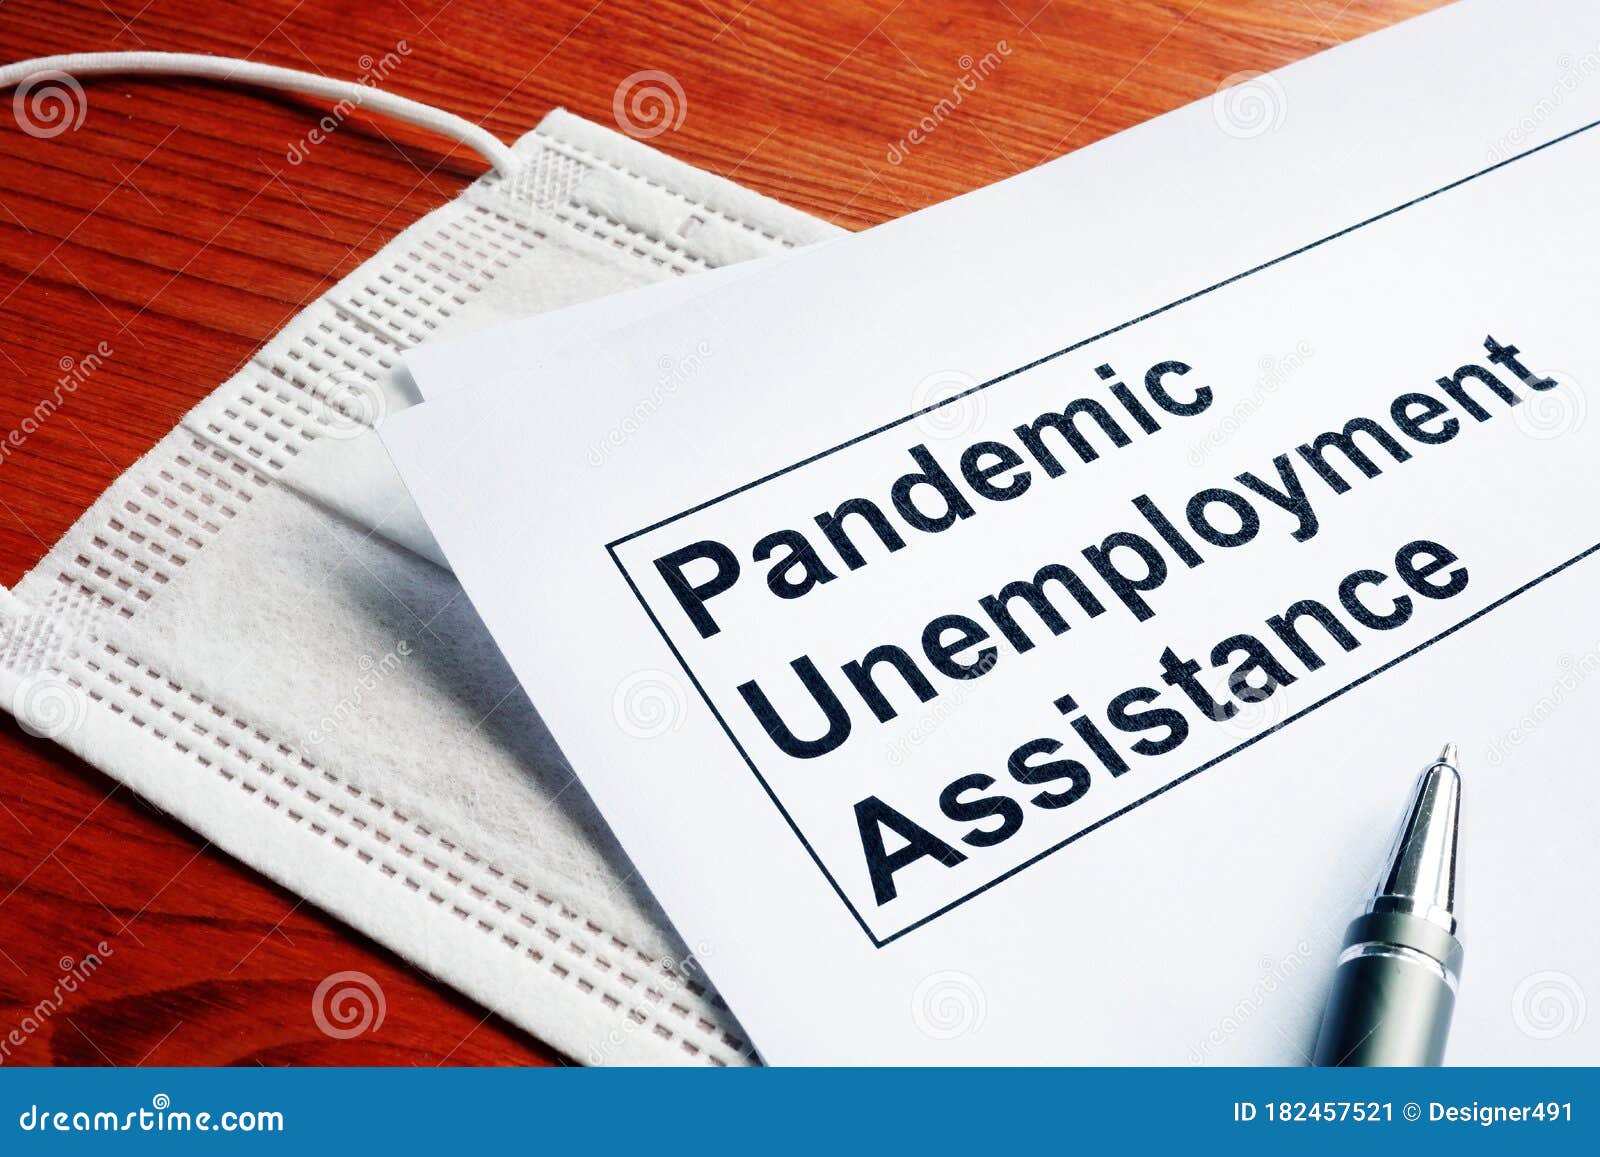 pandemic unemployment assistance pua and medical mask